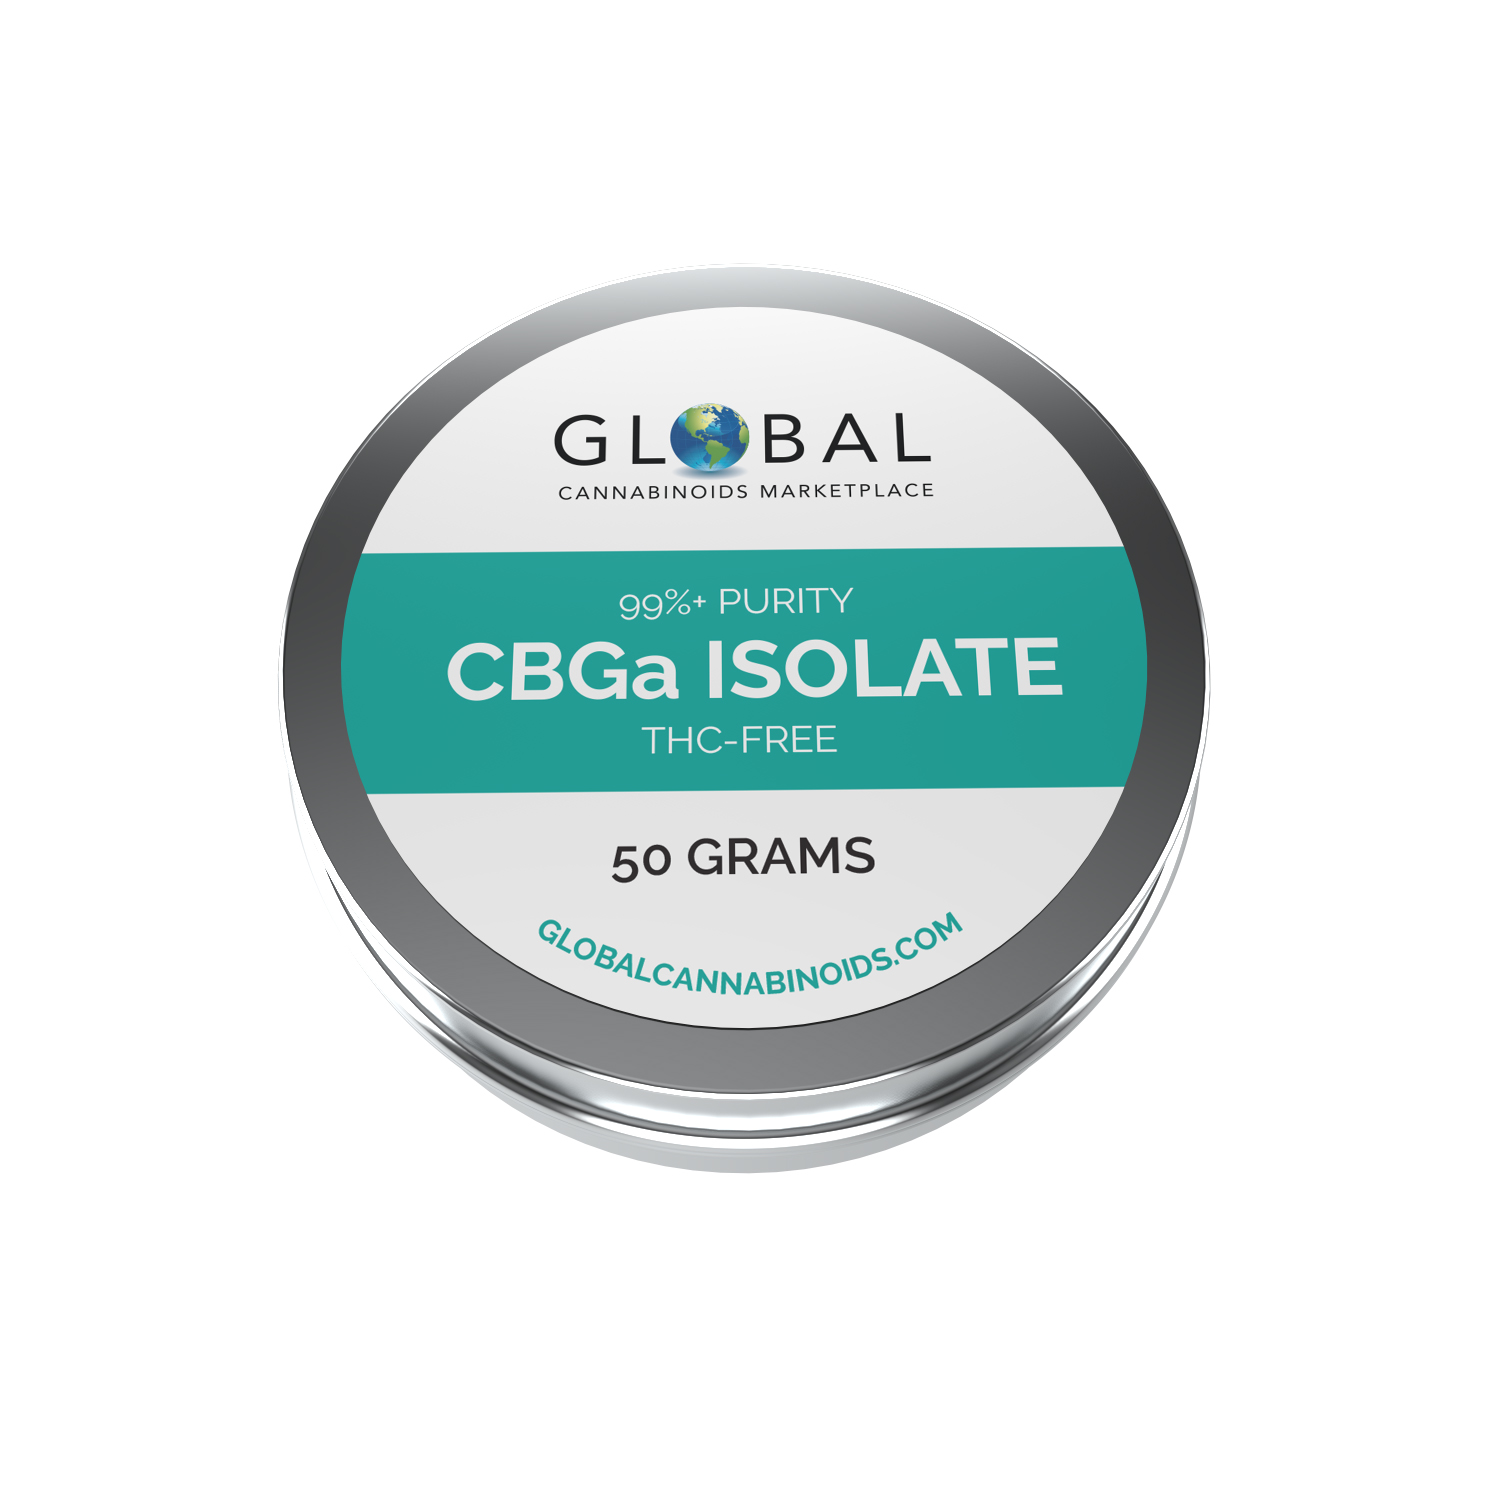 Round flat tin with white and green label that reads Global Cannabinoids Marketplace 99 percent purity CBGa Isolate thc free 50 grams global cannabinoids dot com